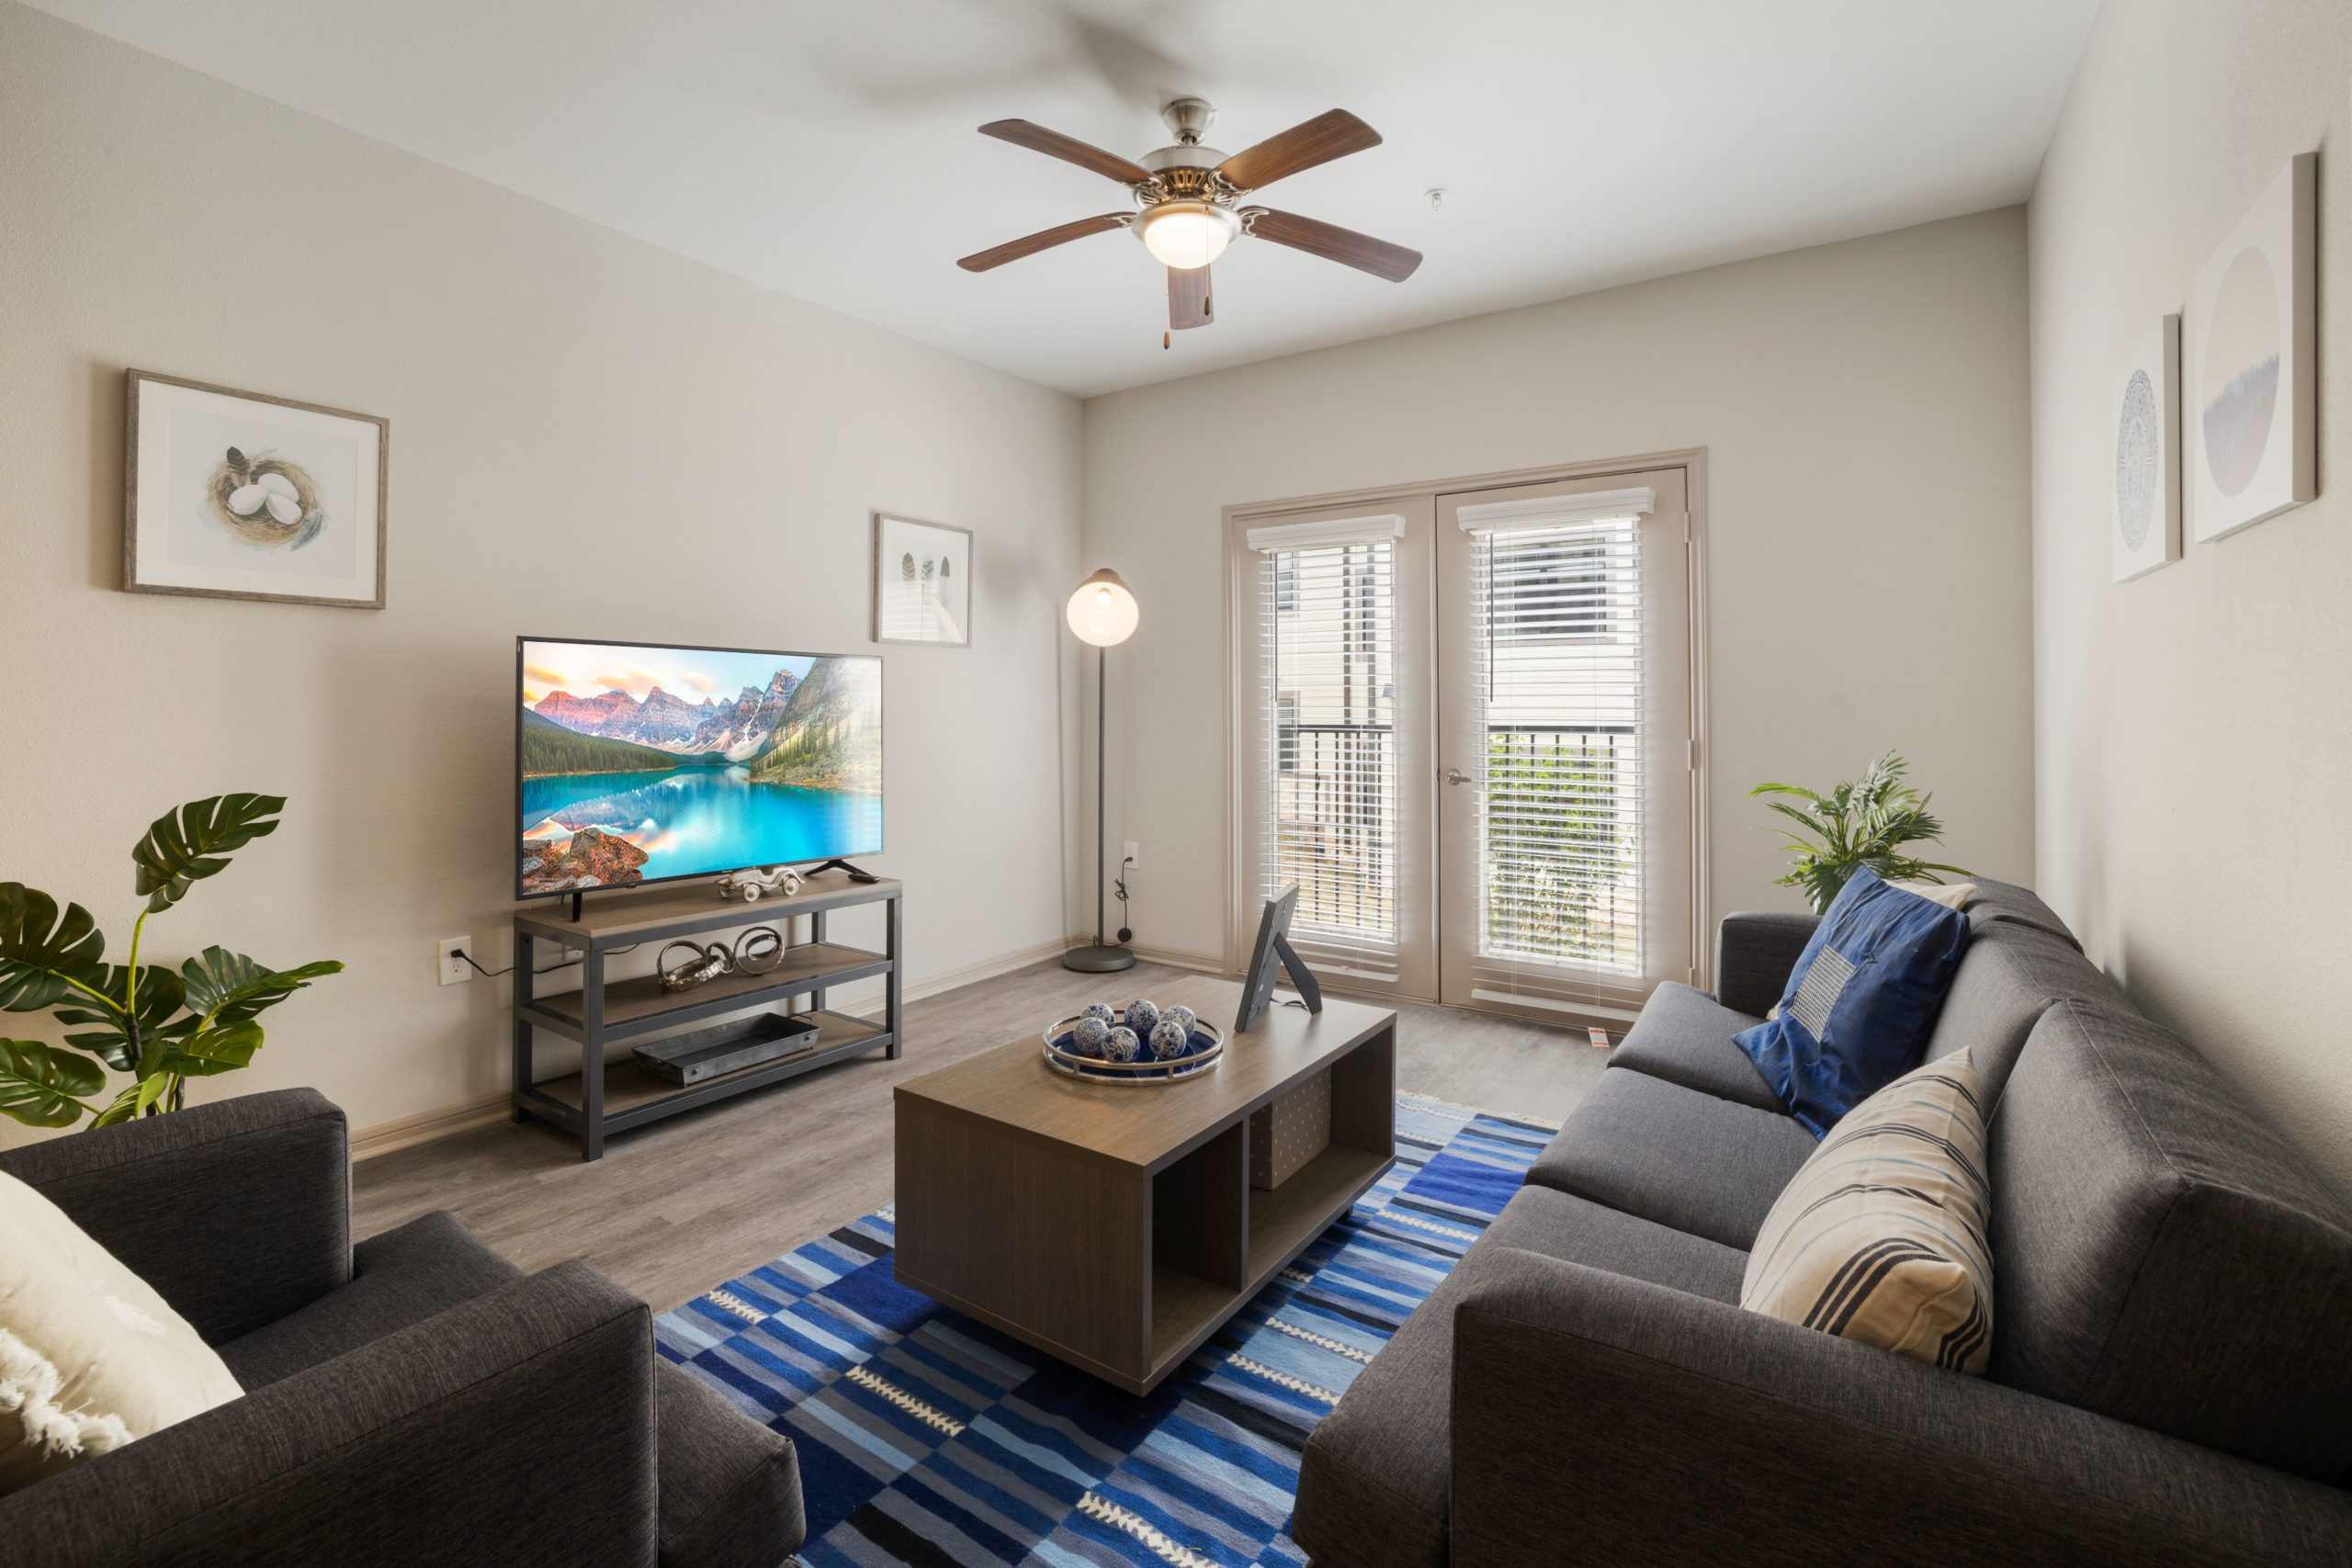 Living Room Package Deals With Tv